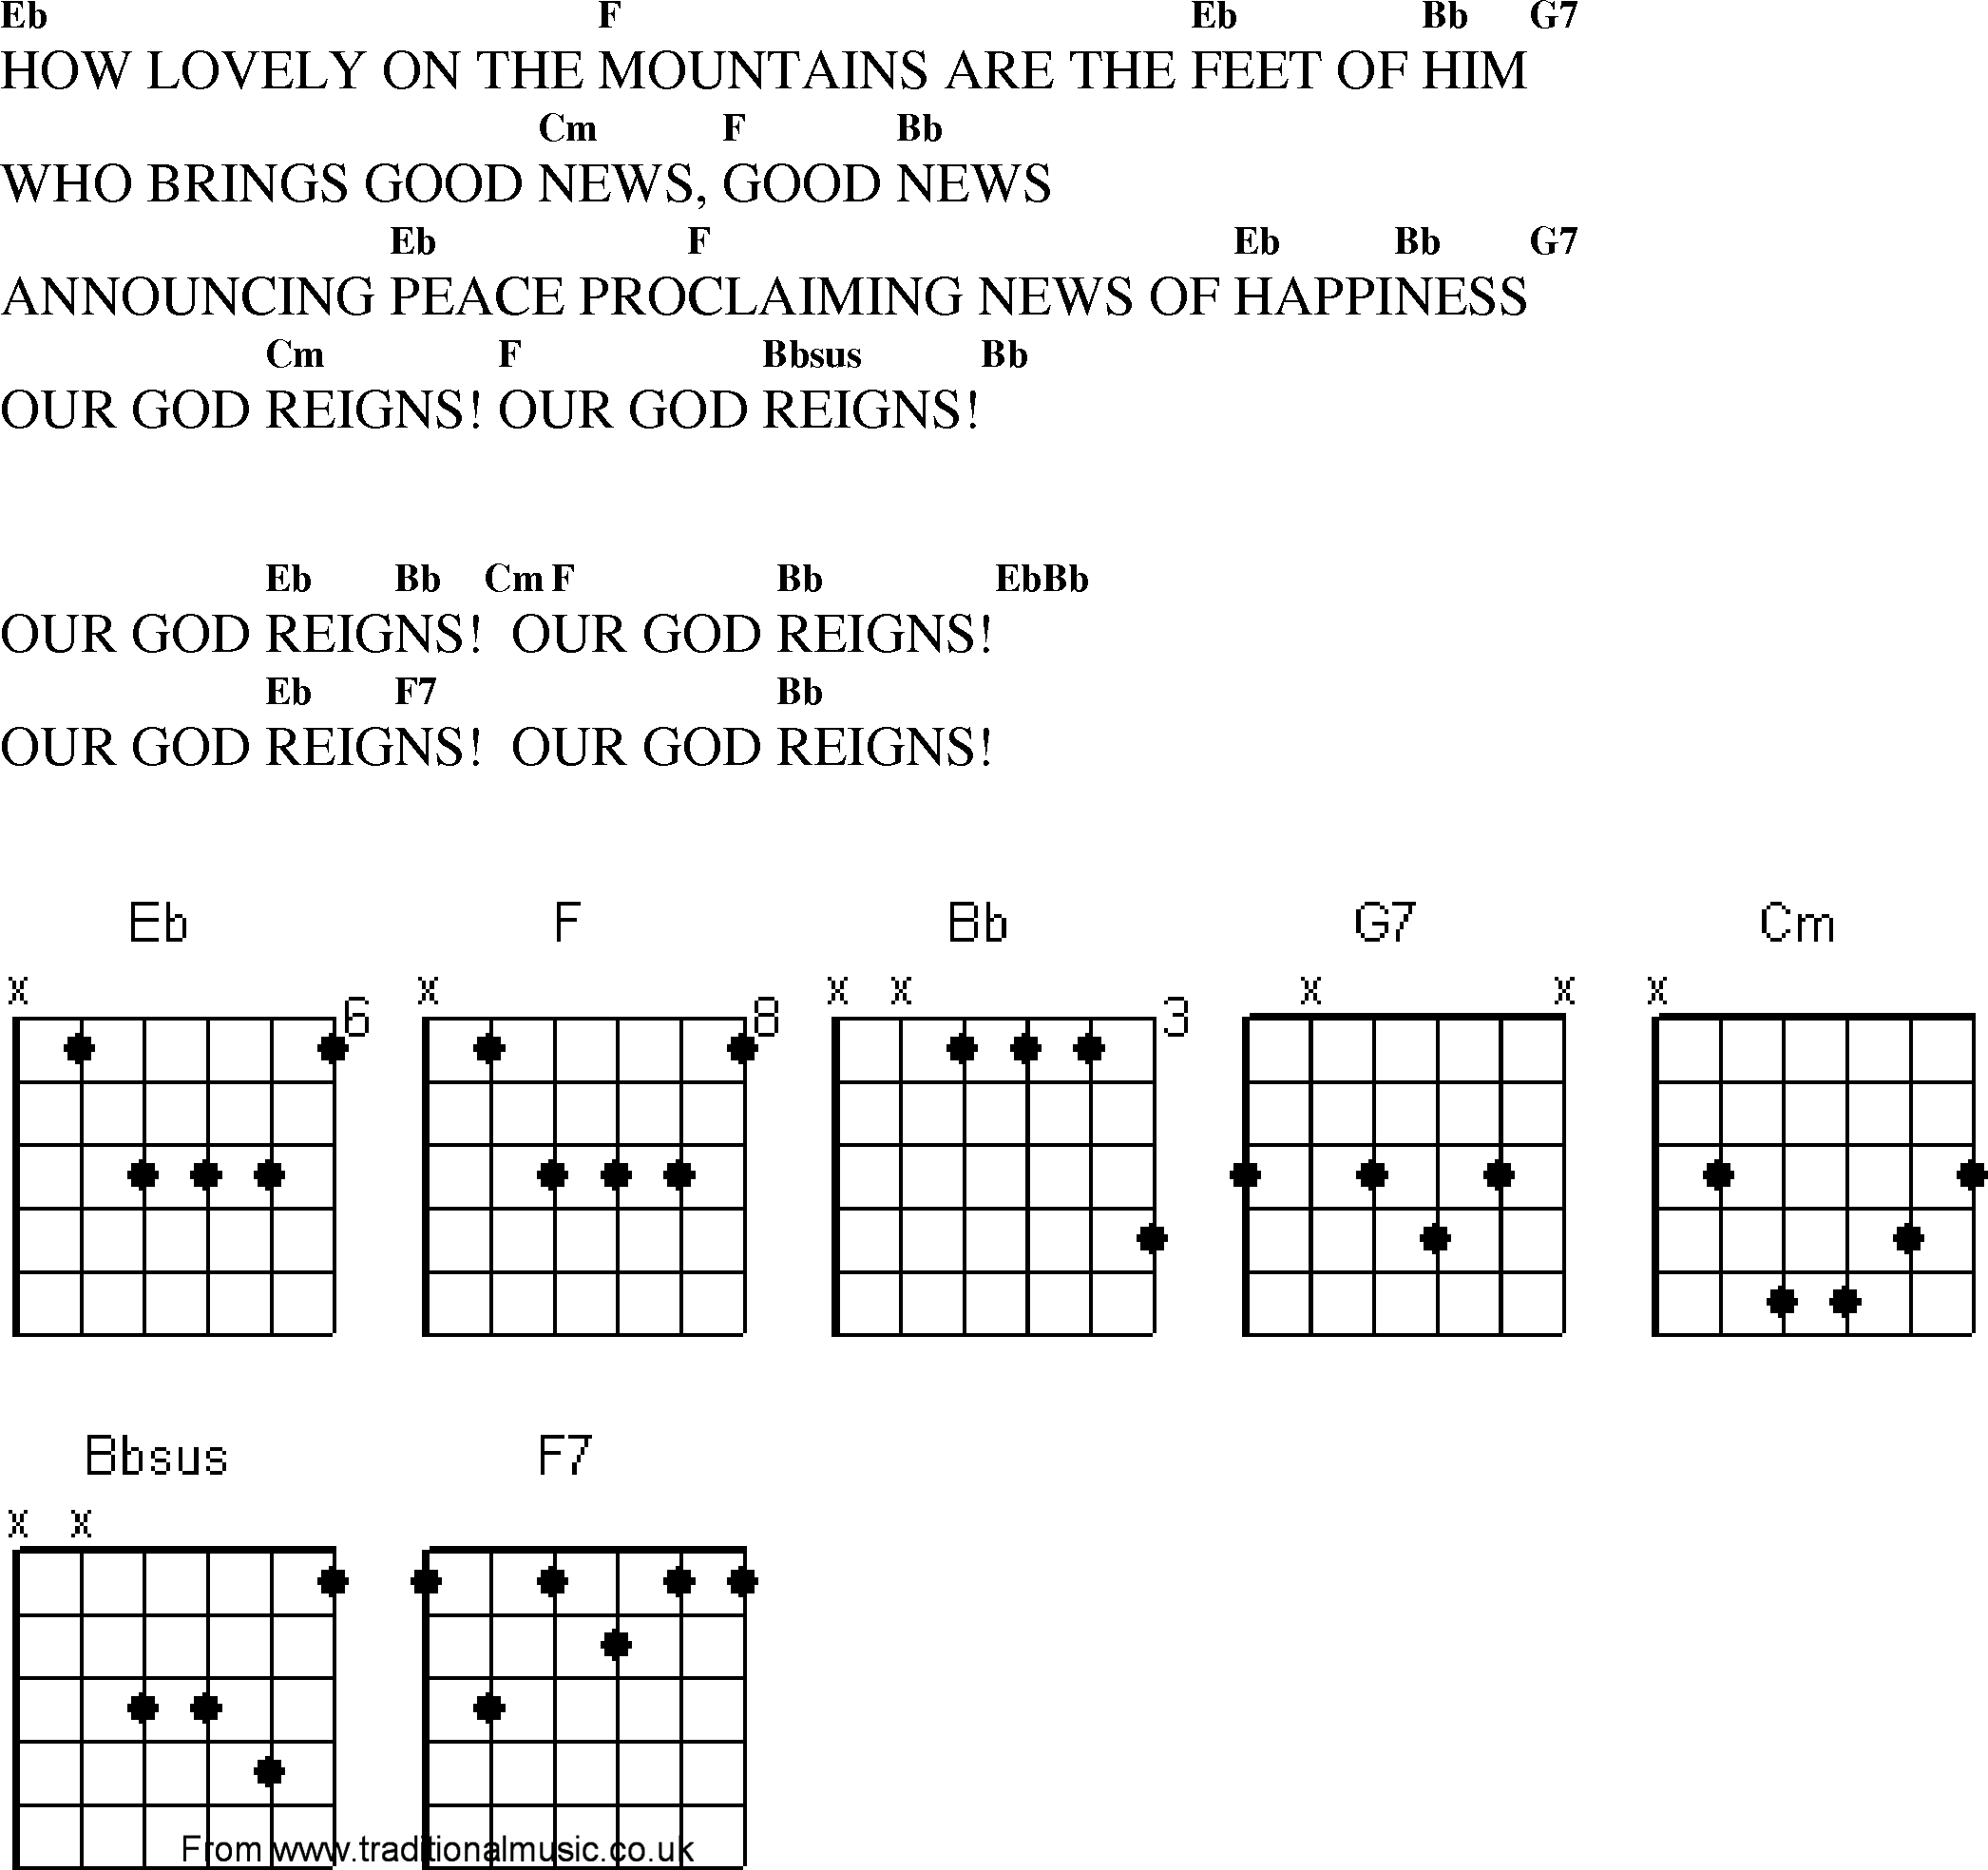 Gospel Song: how_lovely_on_the_mountins, lyrics and chords.